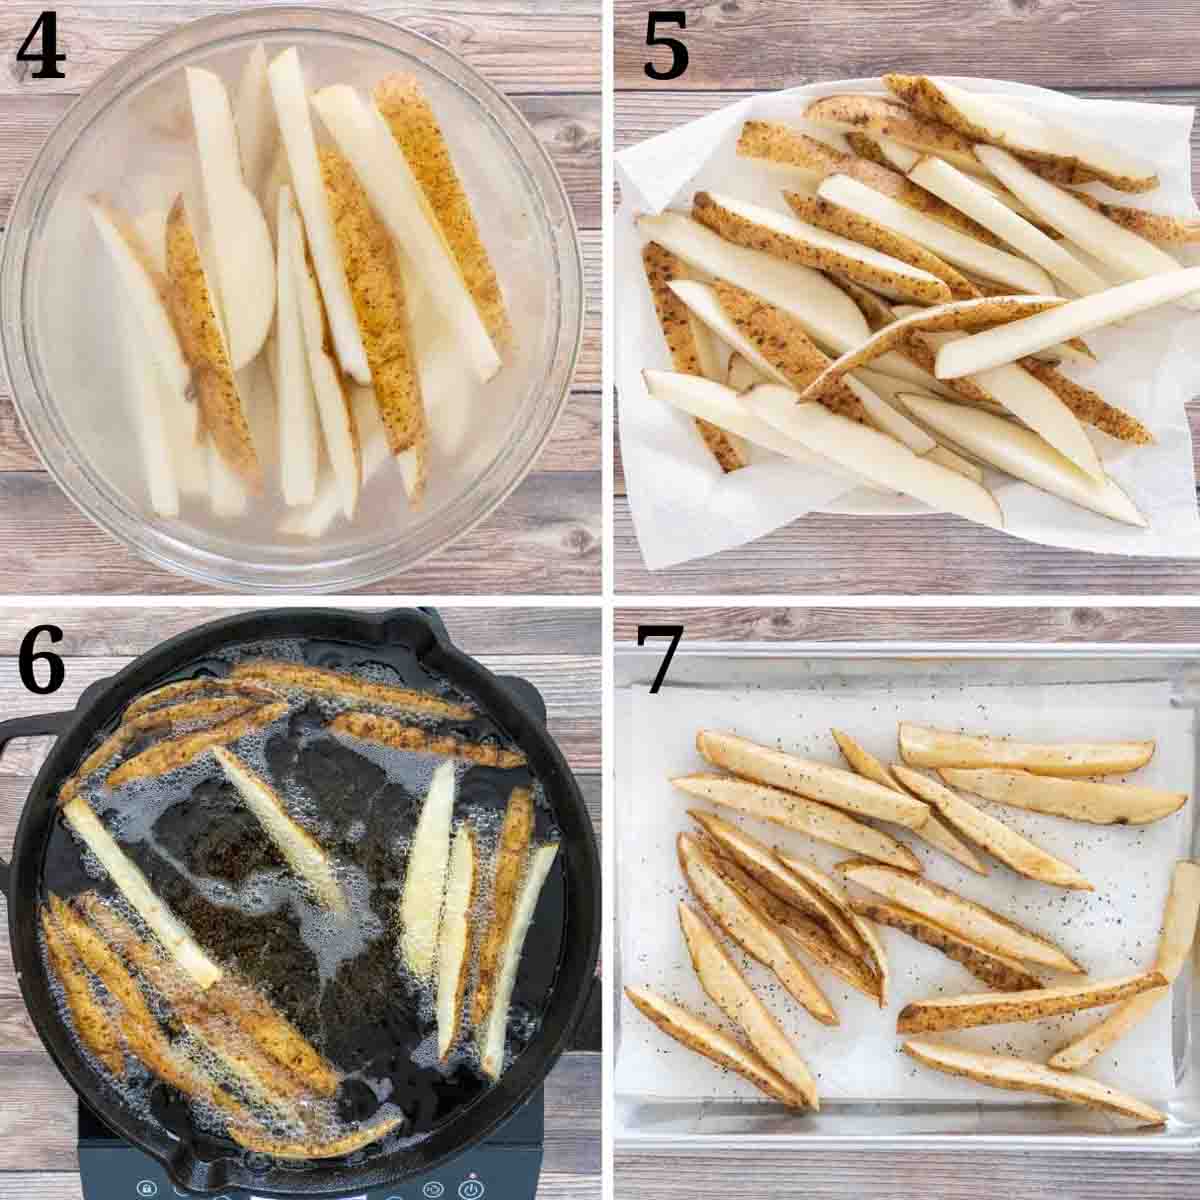 Collage showing how to finish making french fries.